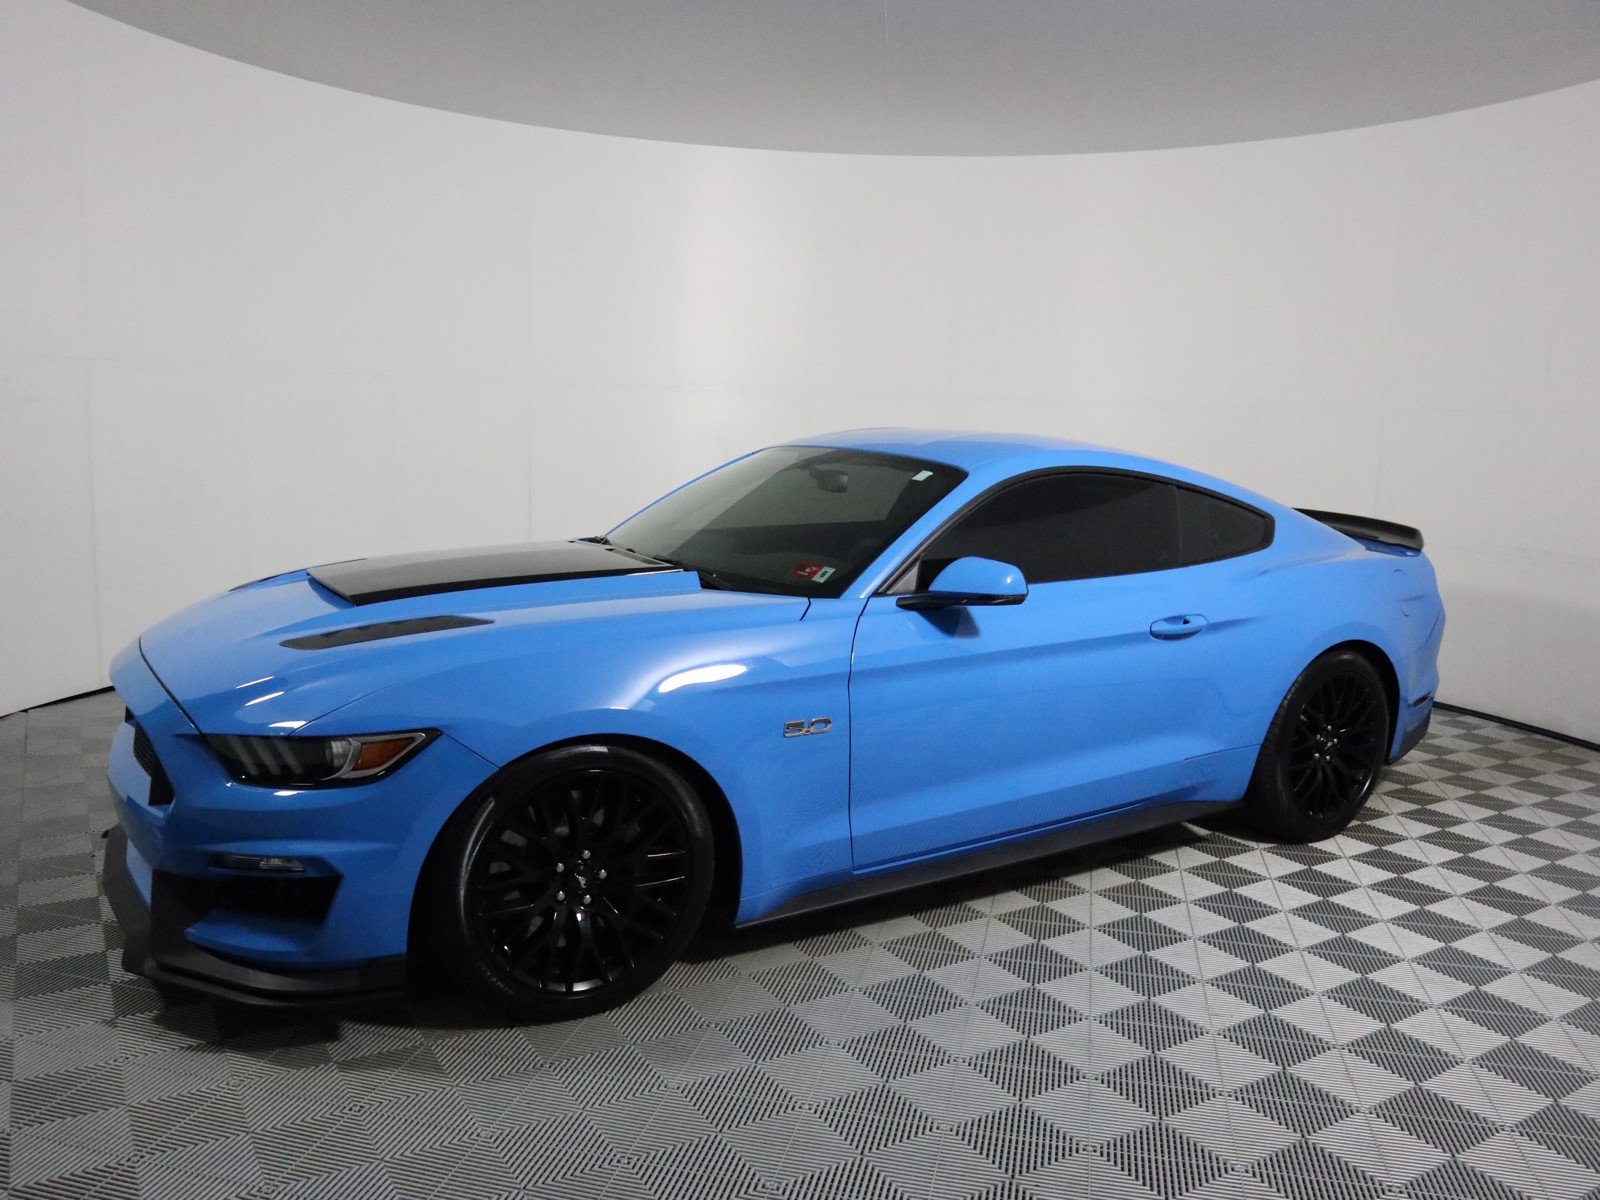 PreOwned 2017 Ford Mustang GT Premium 2dr Car in